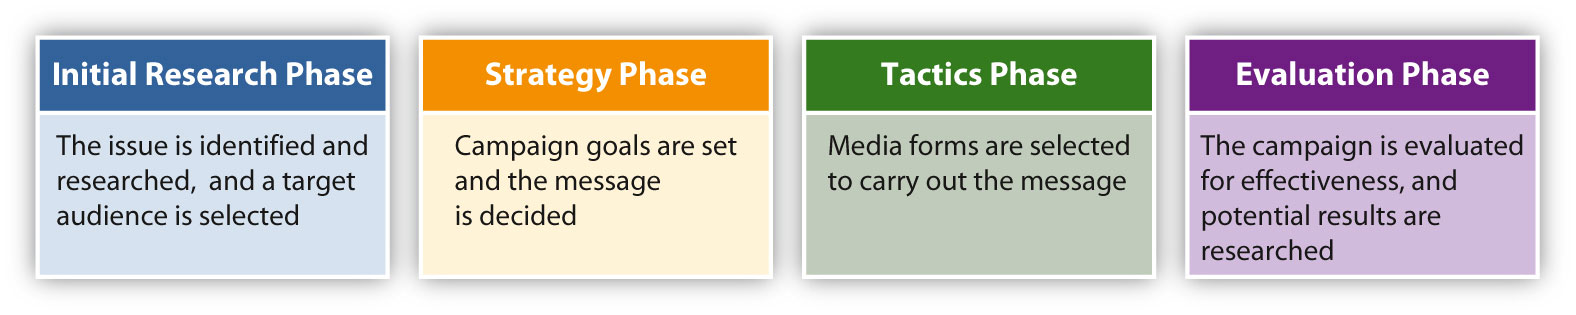 4 phases of a PR campaign: 1. Initial research 2. Strategy 3. Tactics 4. Evaluation. Explanation in text below.